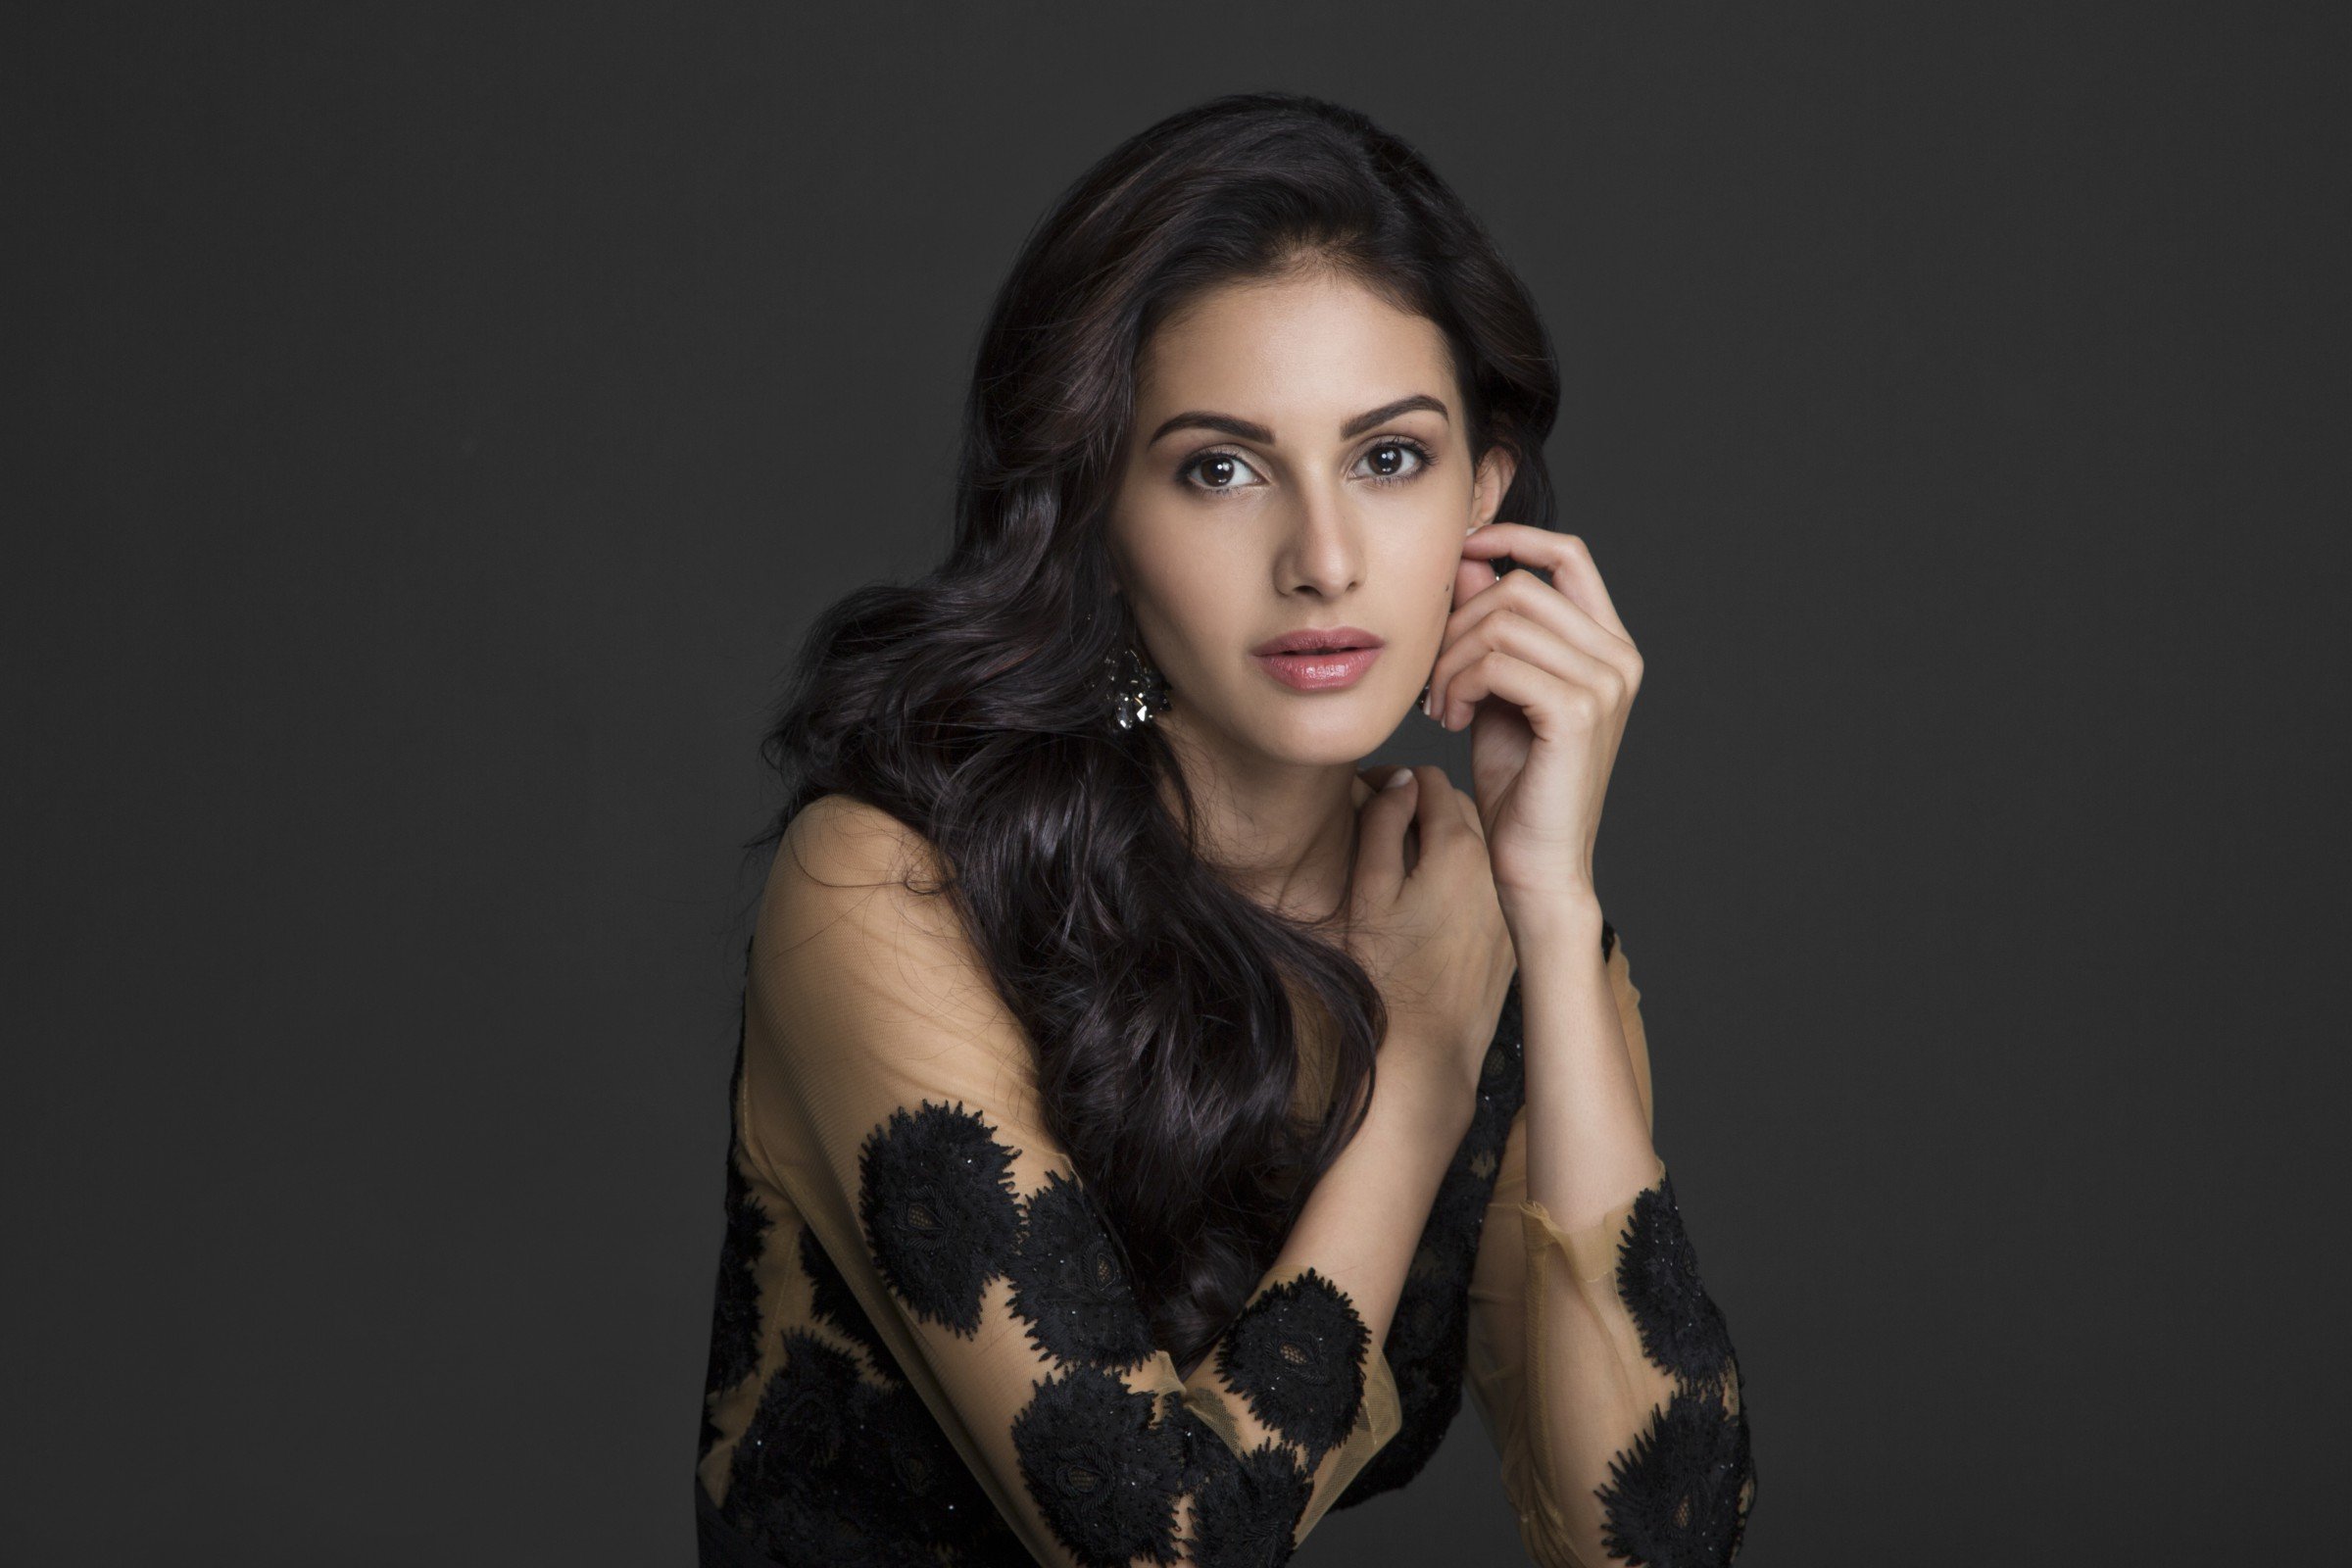 amyra, Dastur, Bollywood, Actress, Model, Girl, Beautiful, Brunette, Pretty, Cute, Beauty, Sexy, Hot, Pose, Face, Eyes, Hair, Lips, Smile, Figure, India Wallpaper